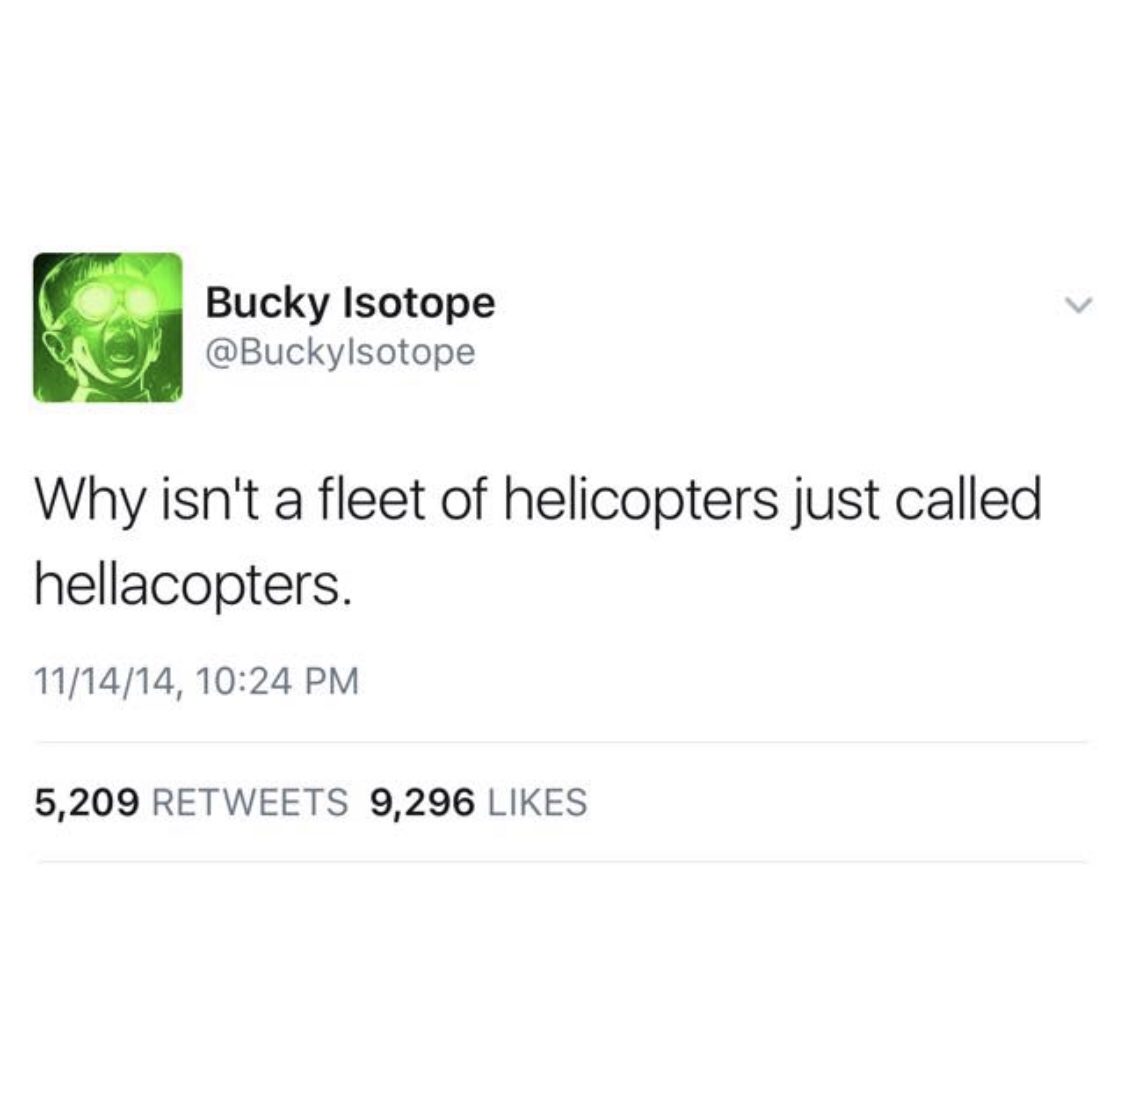 paper - Bucky Isotope Why isn't a fleet of helicopters just called hellacopters. 111414, 5,209 9,296